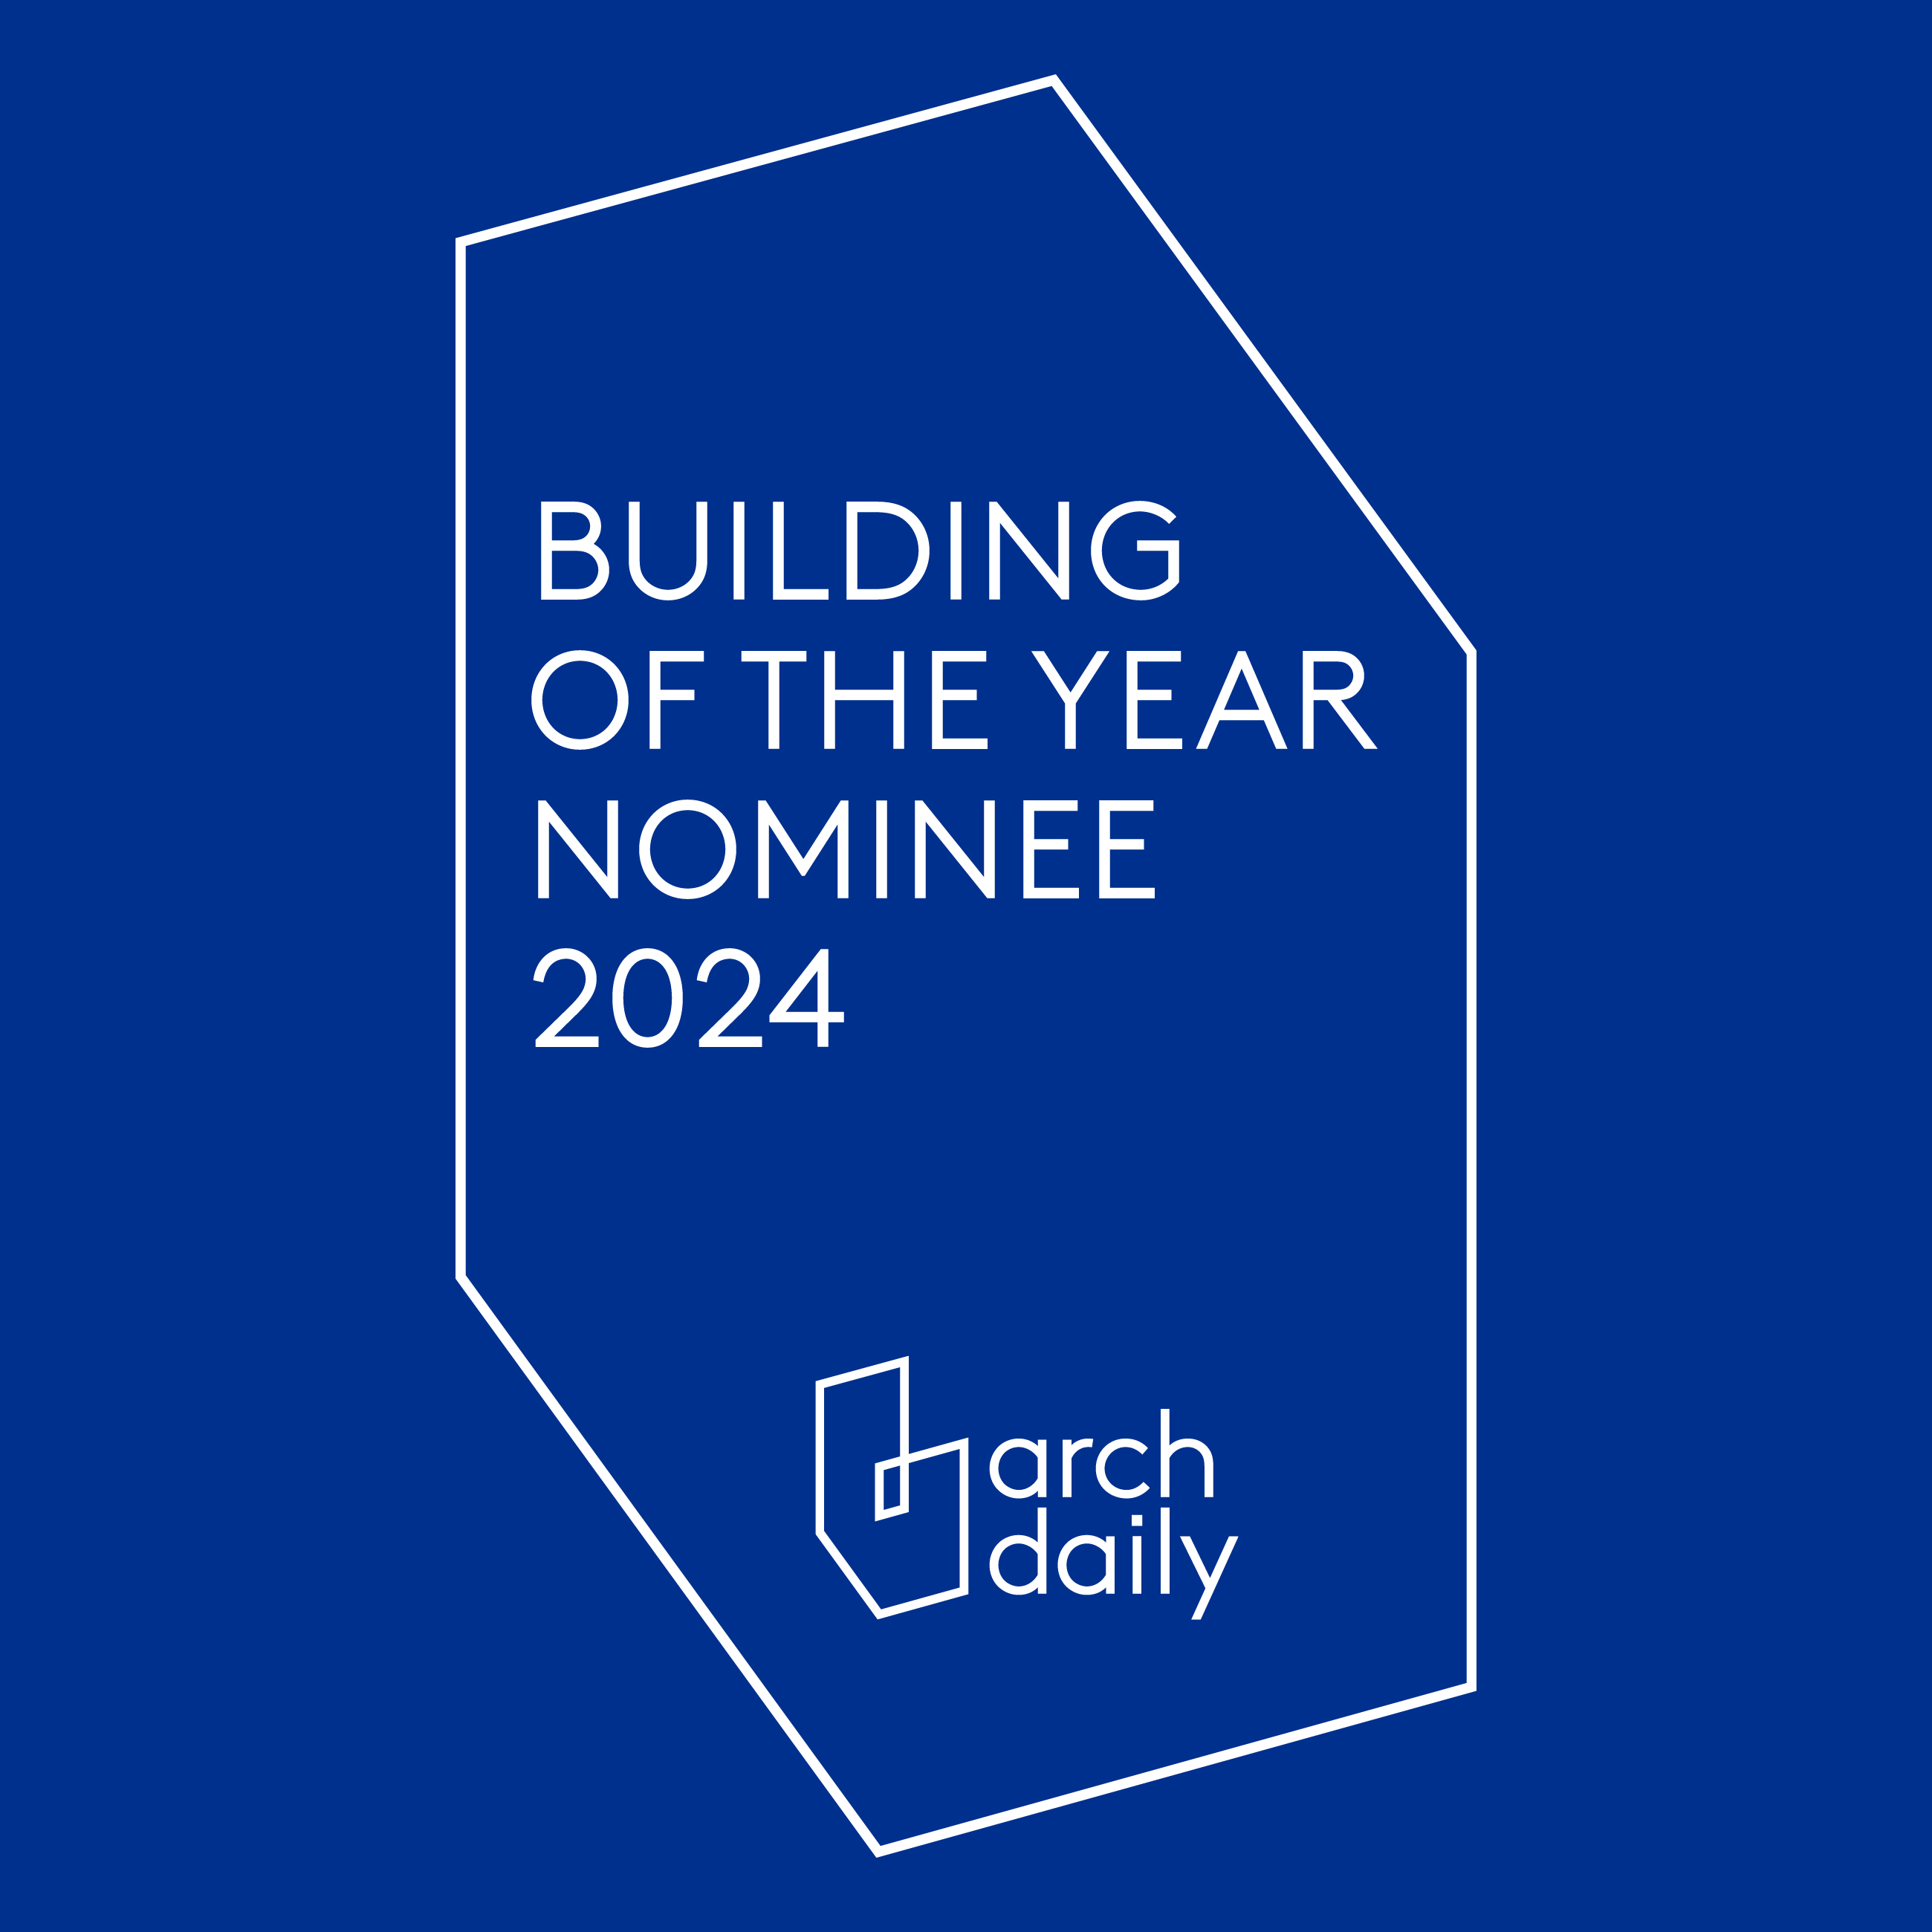 First-stage voting now opens for ArchDaily Building of the Year Awards 2024